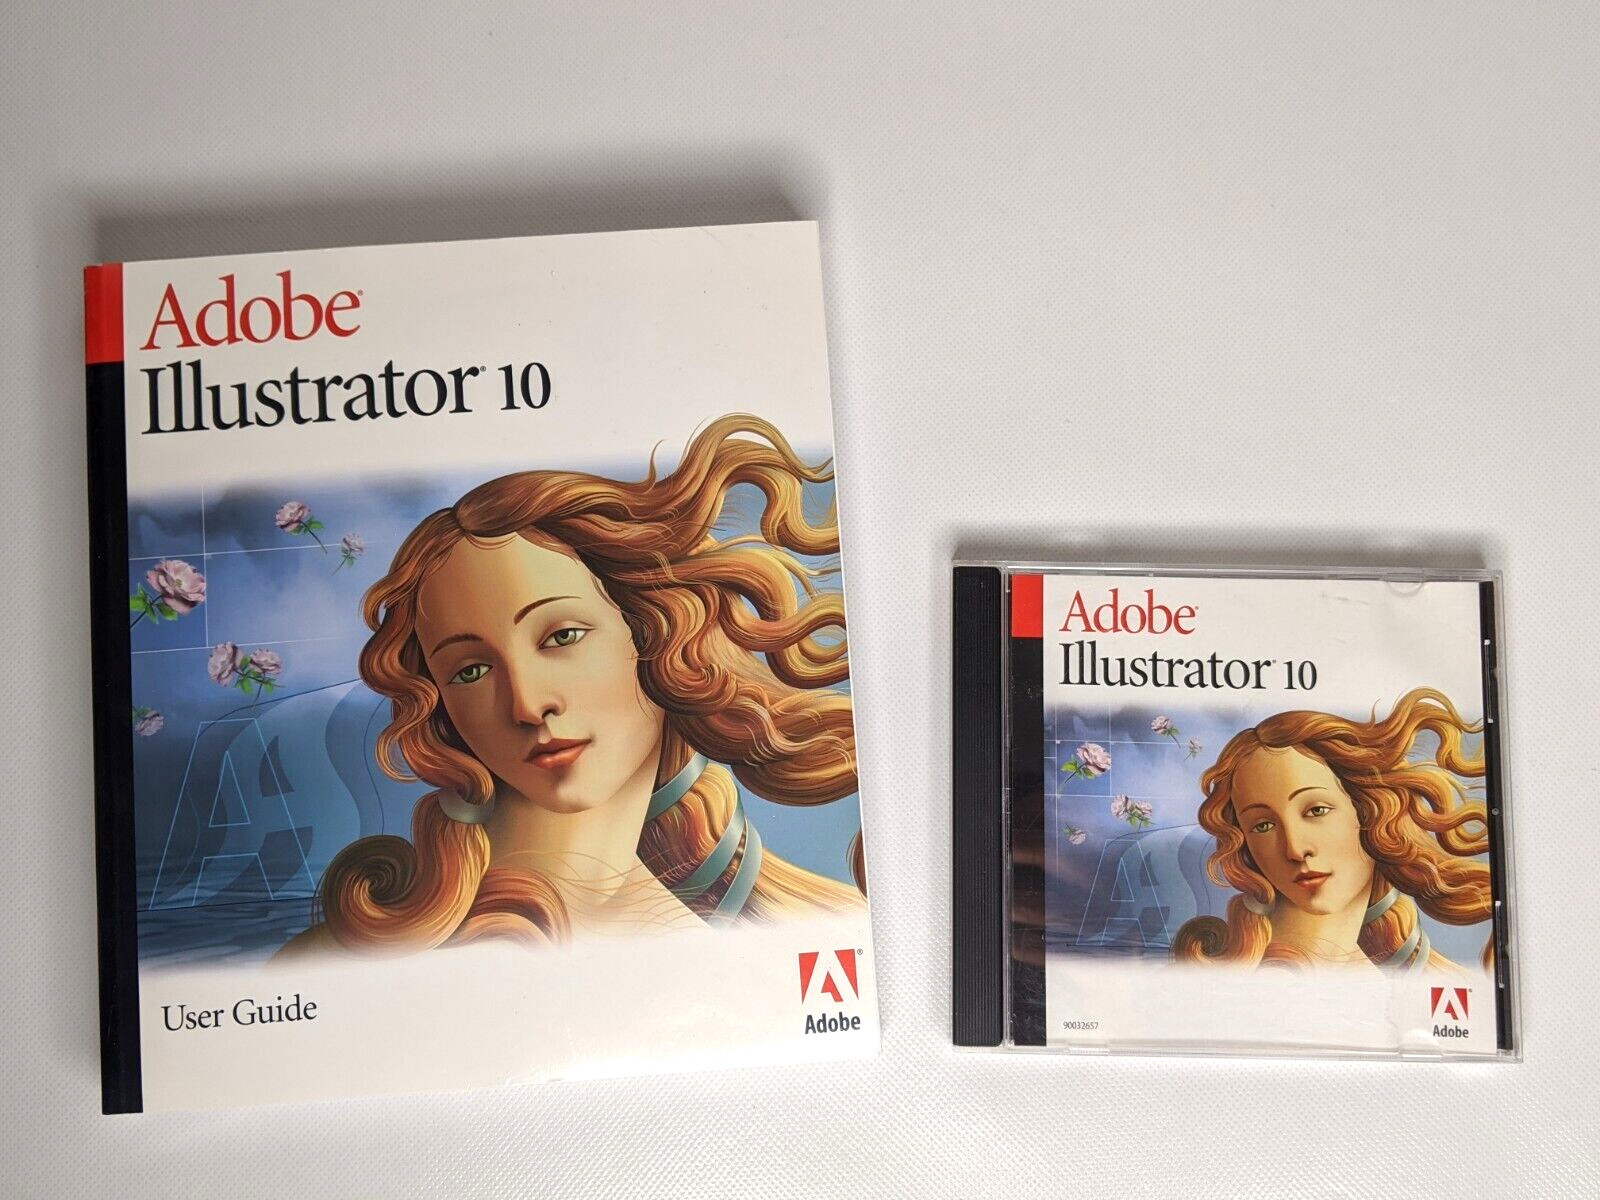 Adobe Illustrator 10 Full Education Version for Mac Macintosh with Sealed Guide